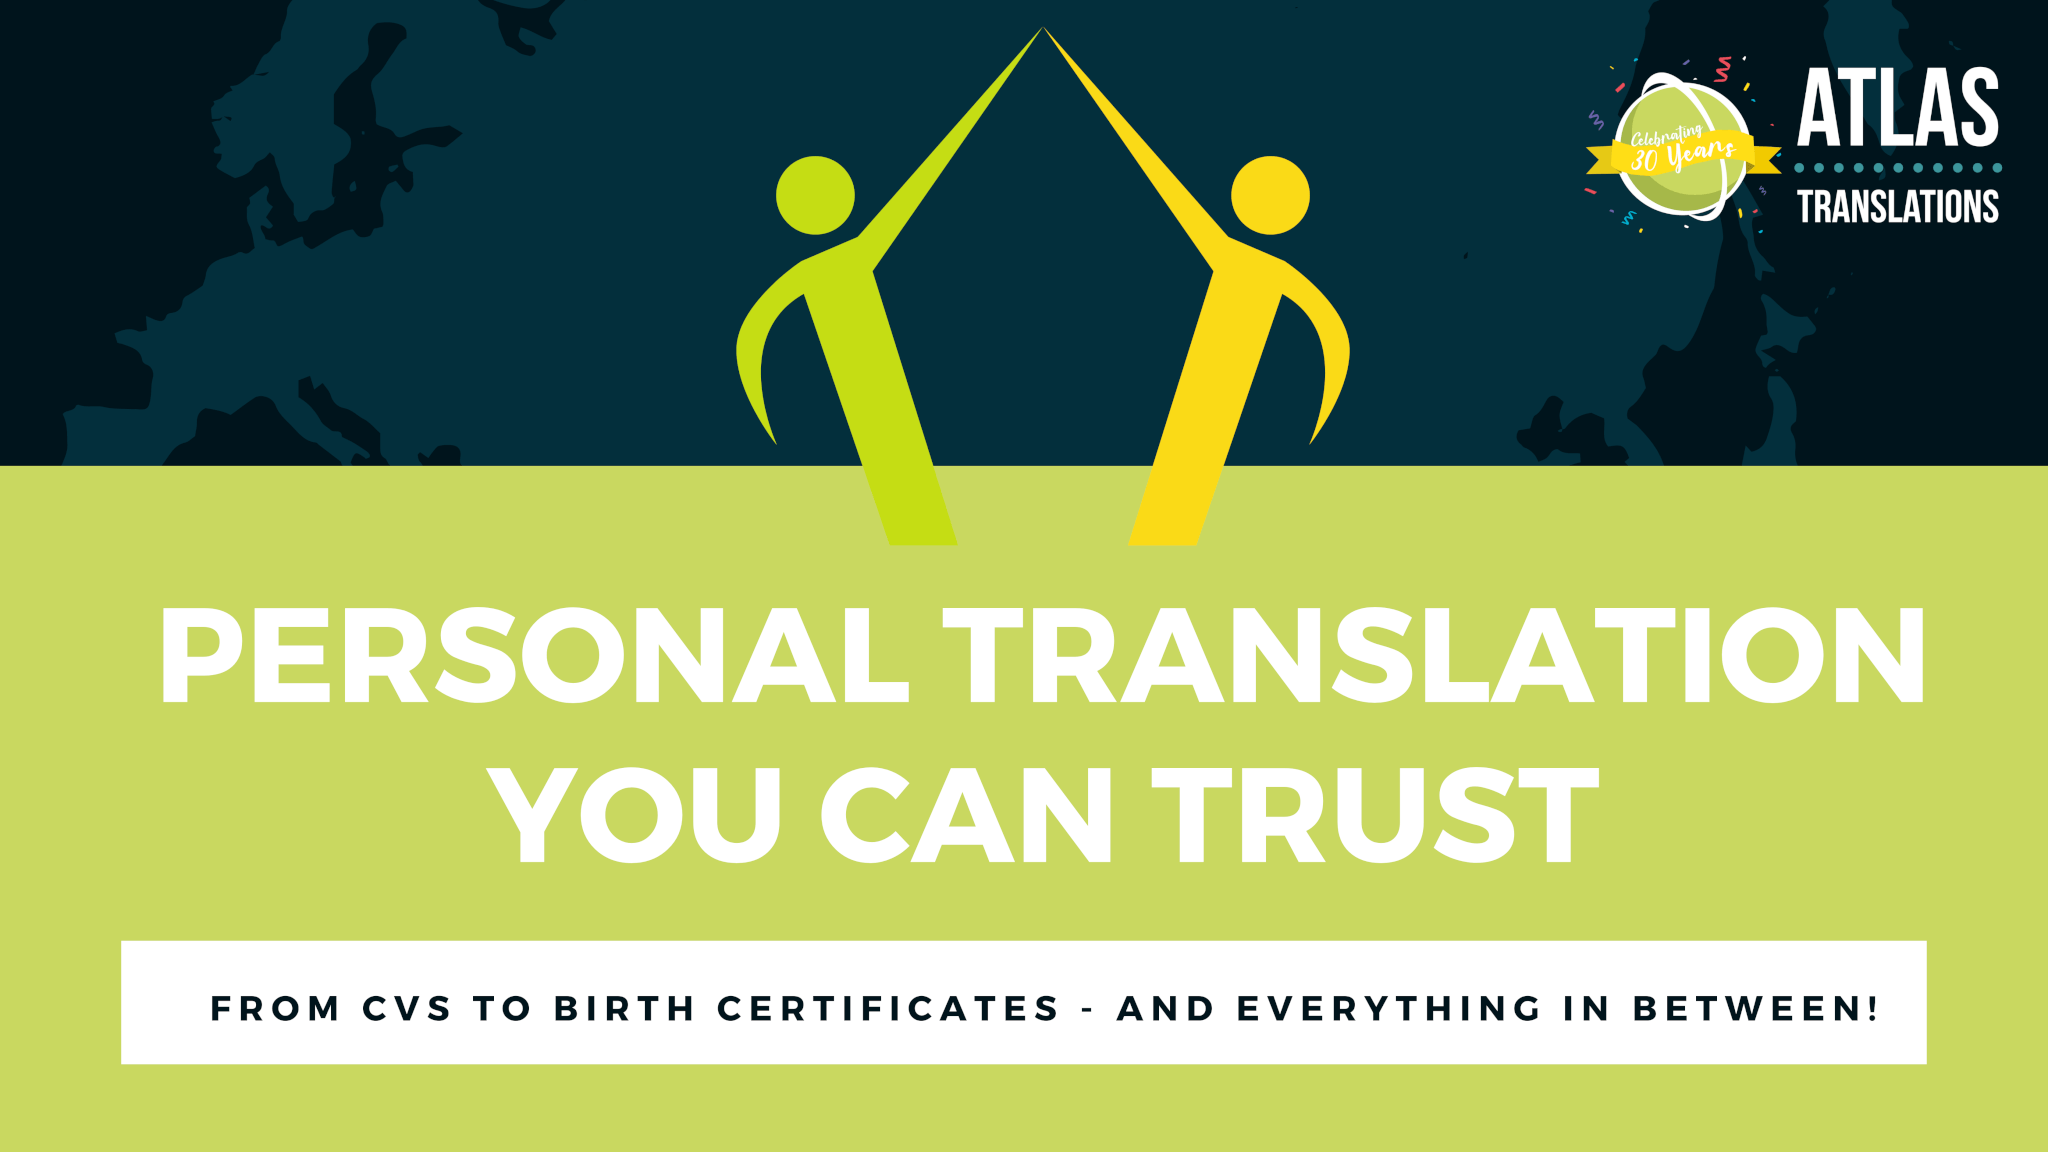 Personal Translation You Can Trust - Atlas Translations - Translation Agency - Certified Translation